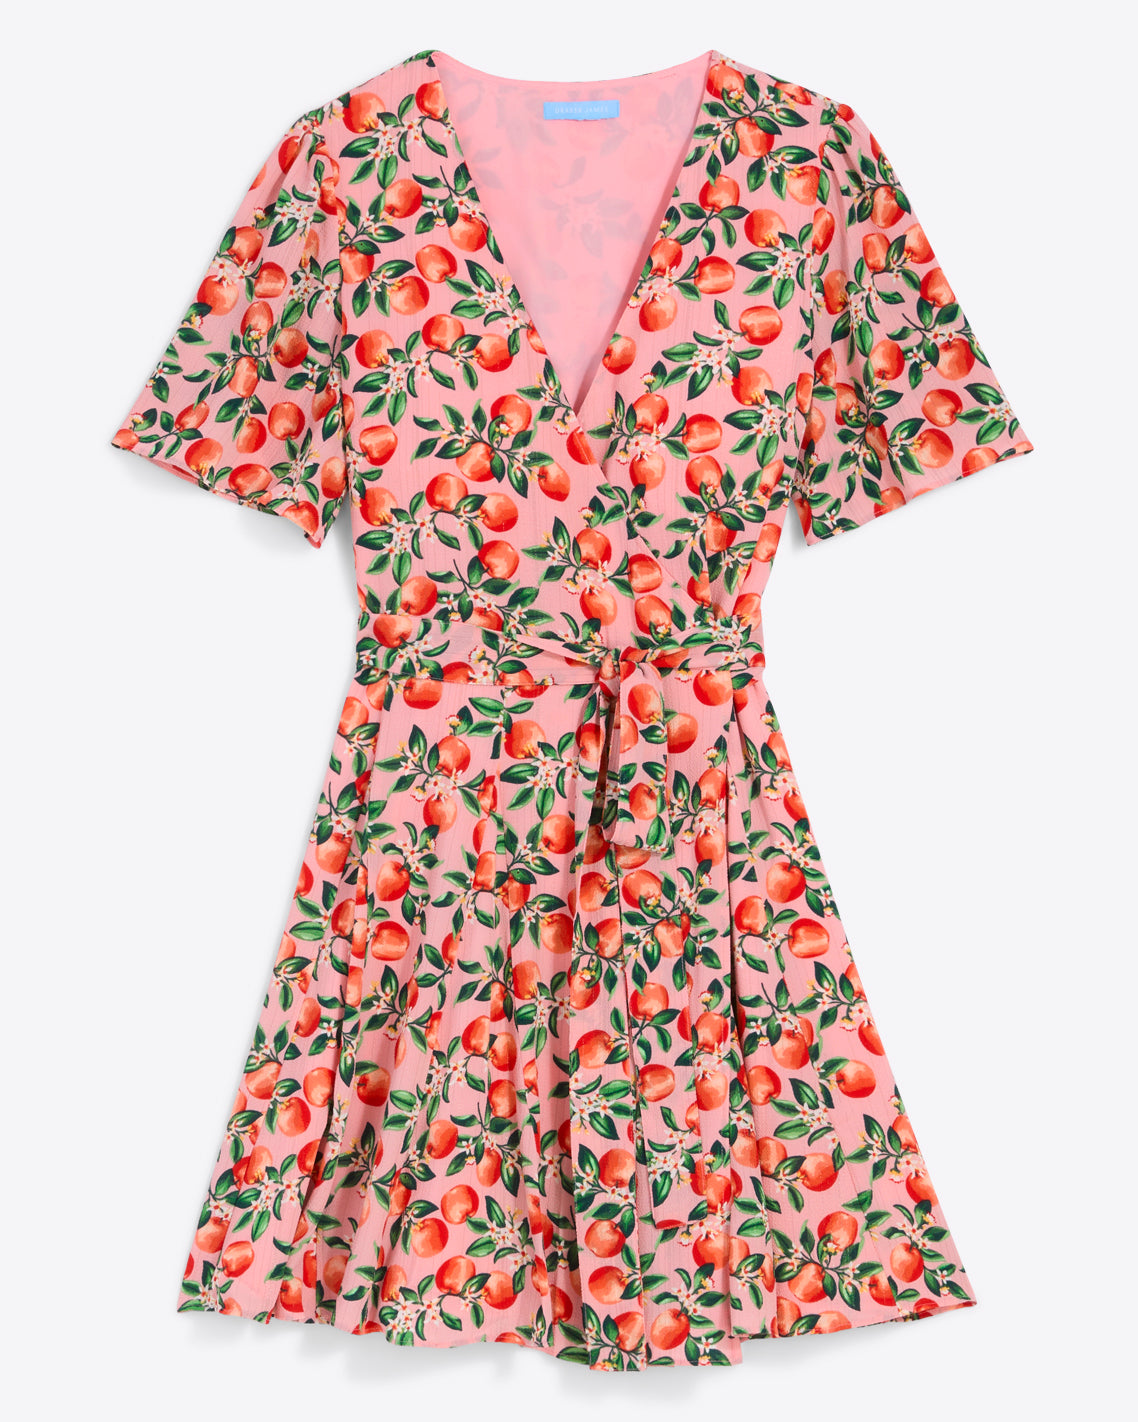 Wendy Wrap Dress in Apple Blossom Floral